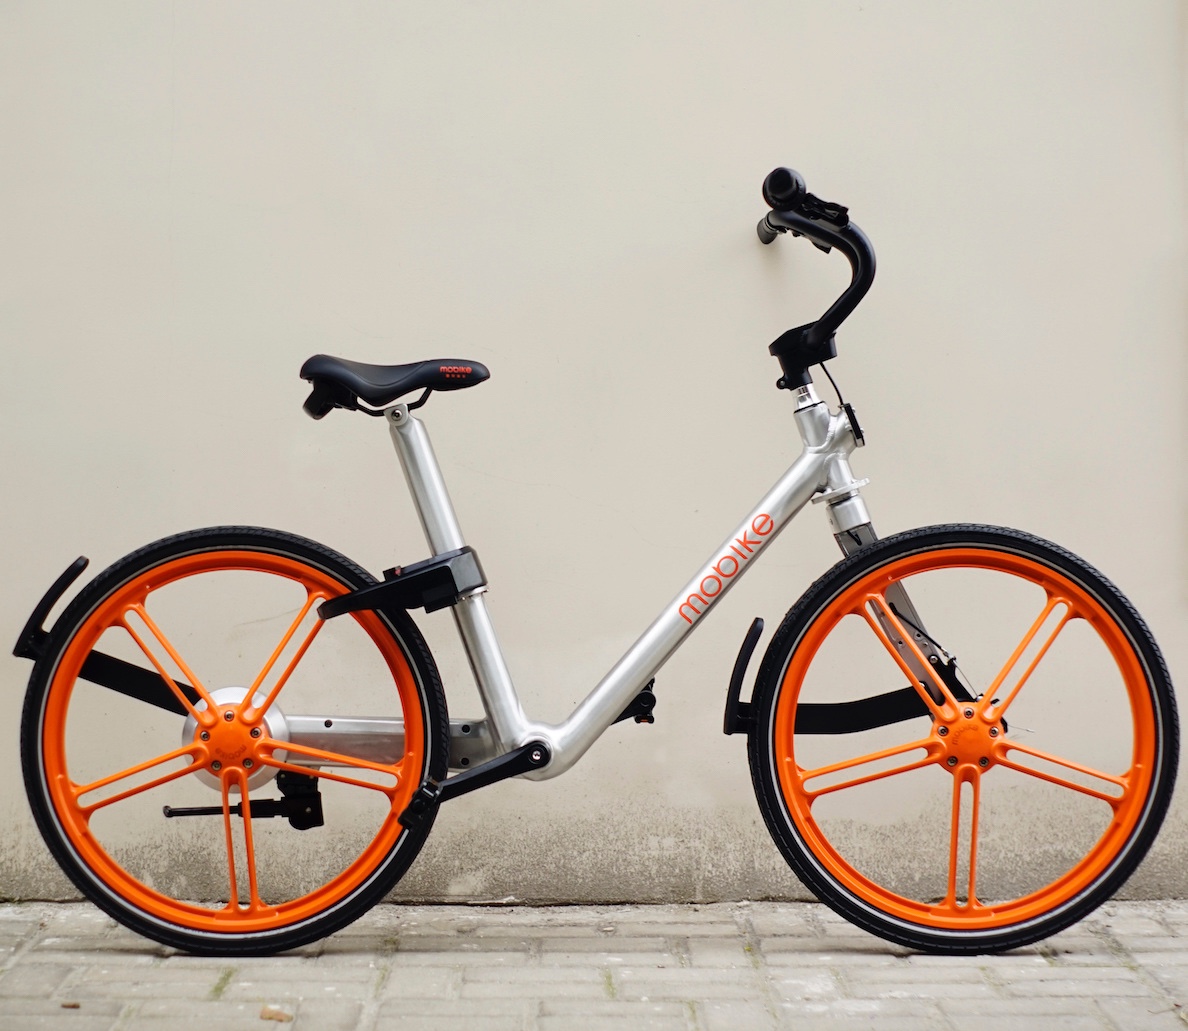 A Guide to China's 6 Leading Bike-Share Models – That's Shanghai